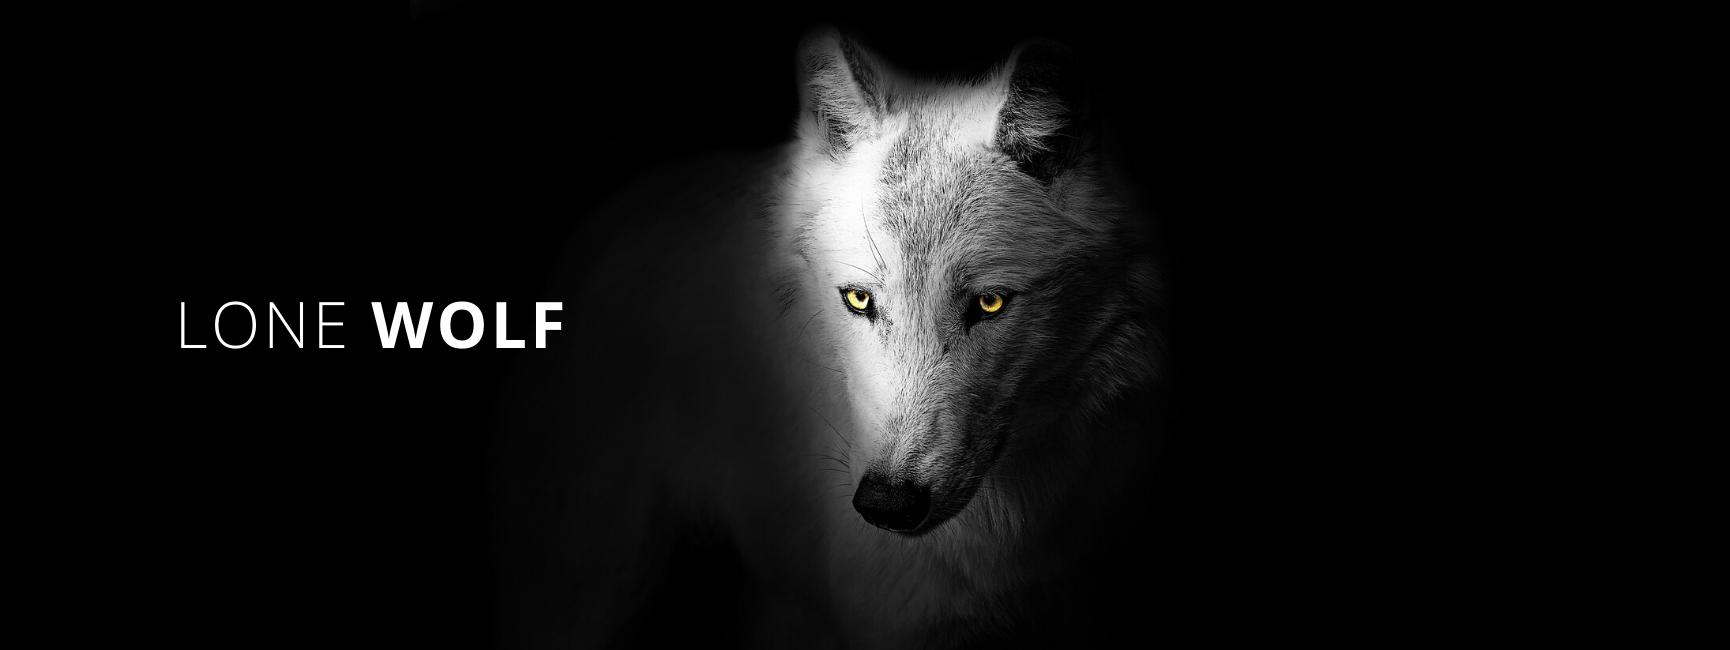 lone wolf dream meaning